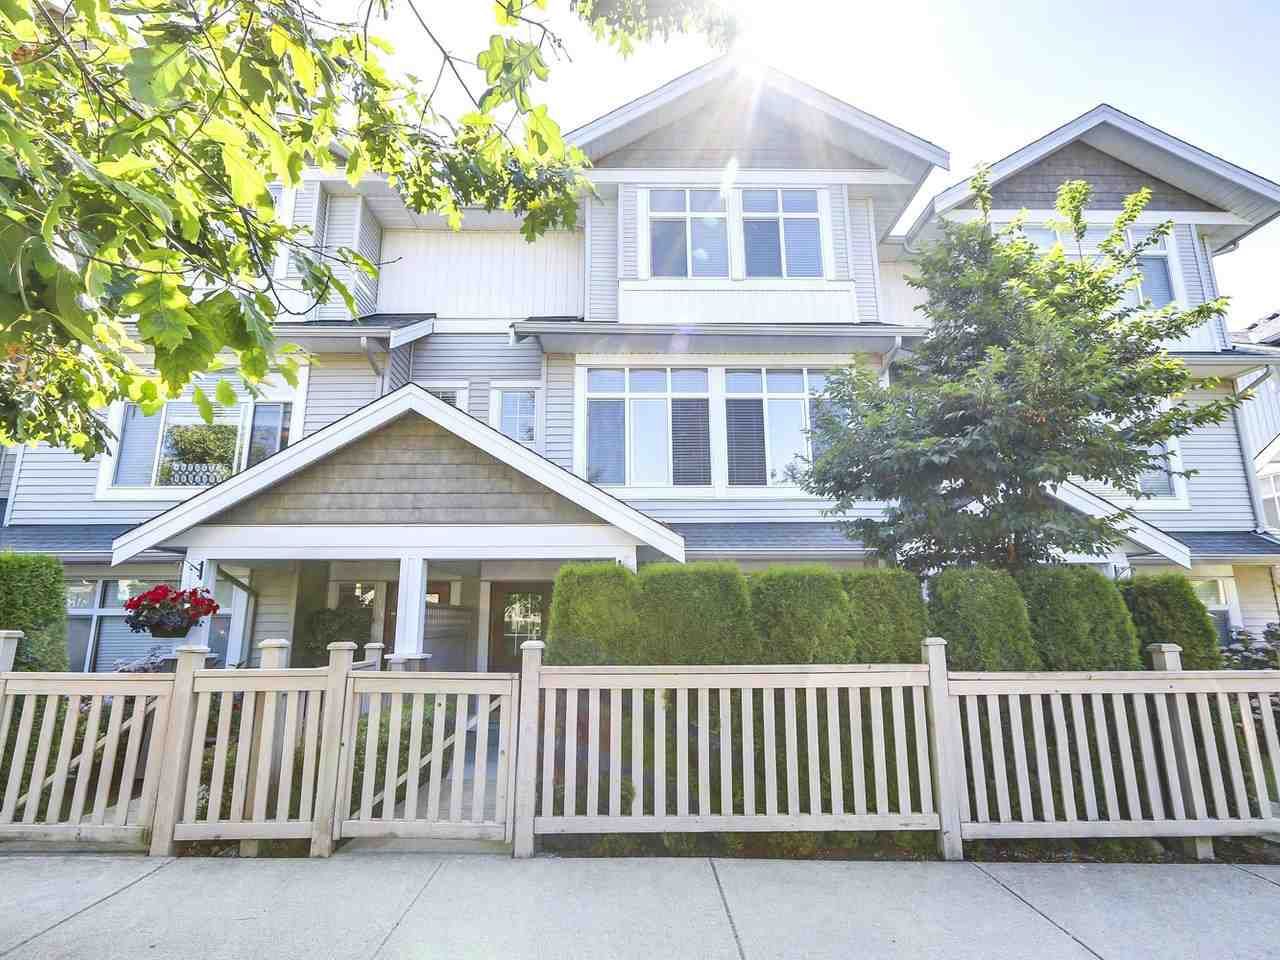 Main Photo: 43 19330 69 AVENUE in Surrey: Clayton Townhouse for sale (Cloverdale)  : MLS®# R2185704